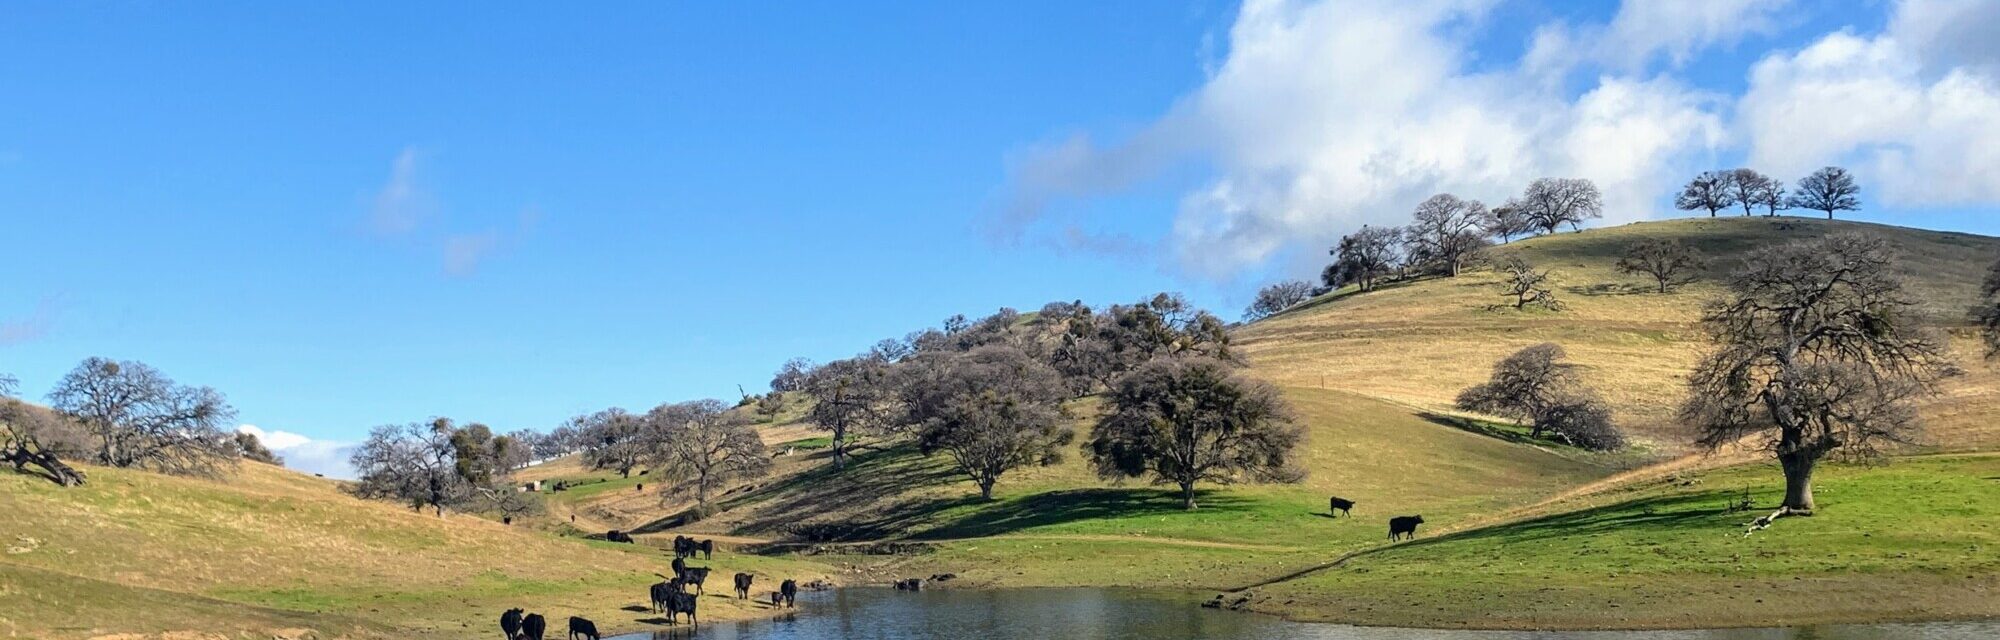 Cattle spread out over hills as spring turns to summer. The oak trees have lost their blooms and the sky is blue with some clouds